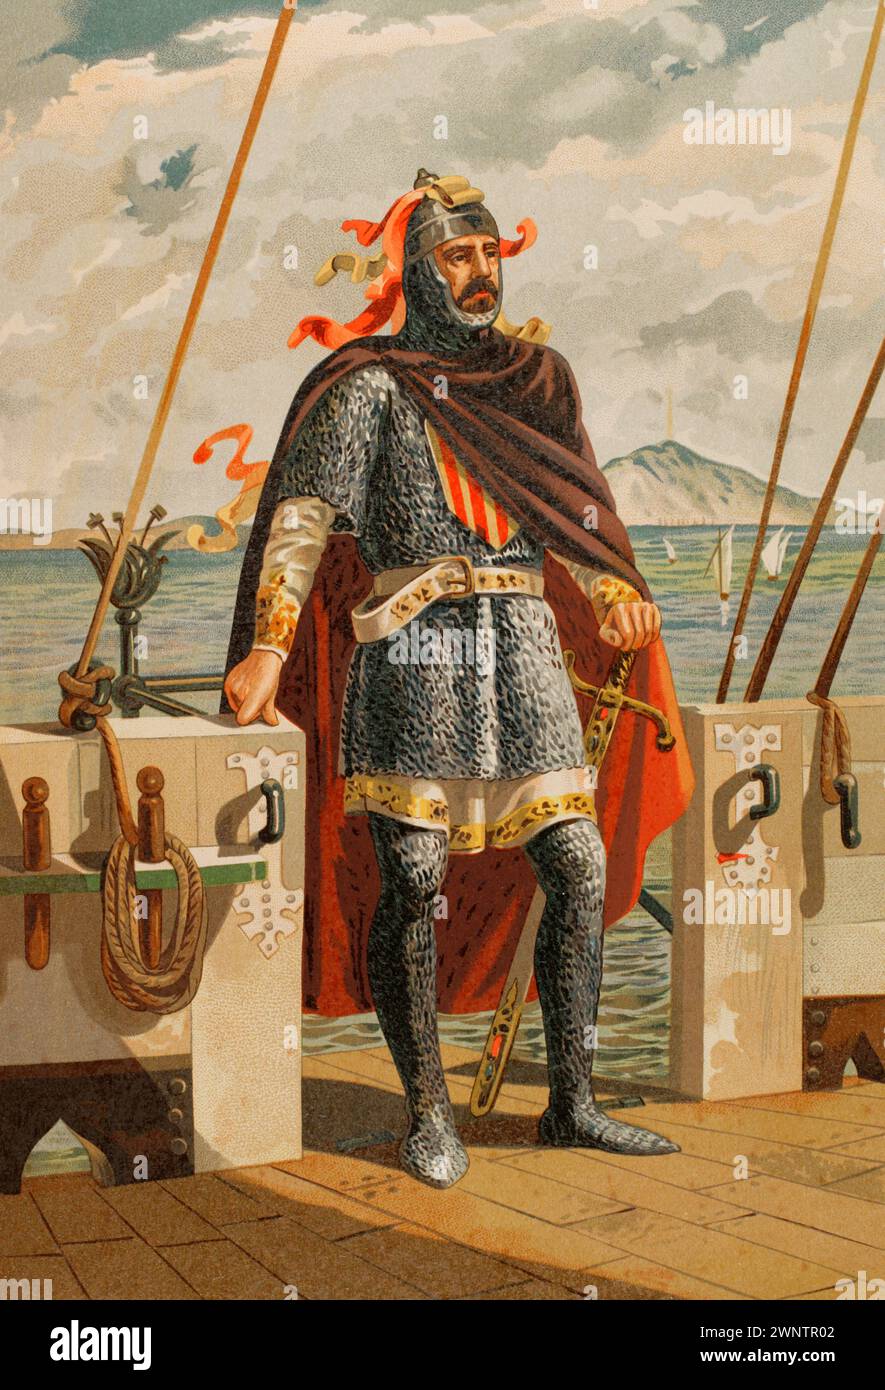 Roger of Lauria (1245-1305). Italian marine and military in the service of the Crown of Aragon as admiral of the kingdom's fleet. Portrait. Chromolithography. 'Glorias Españolas' (Glories of Spain). Volume II. Published in Barcelona, 1890. Stock Photo